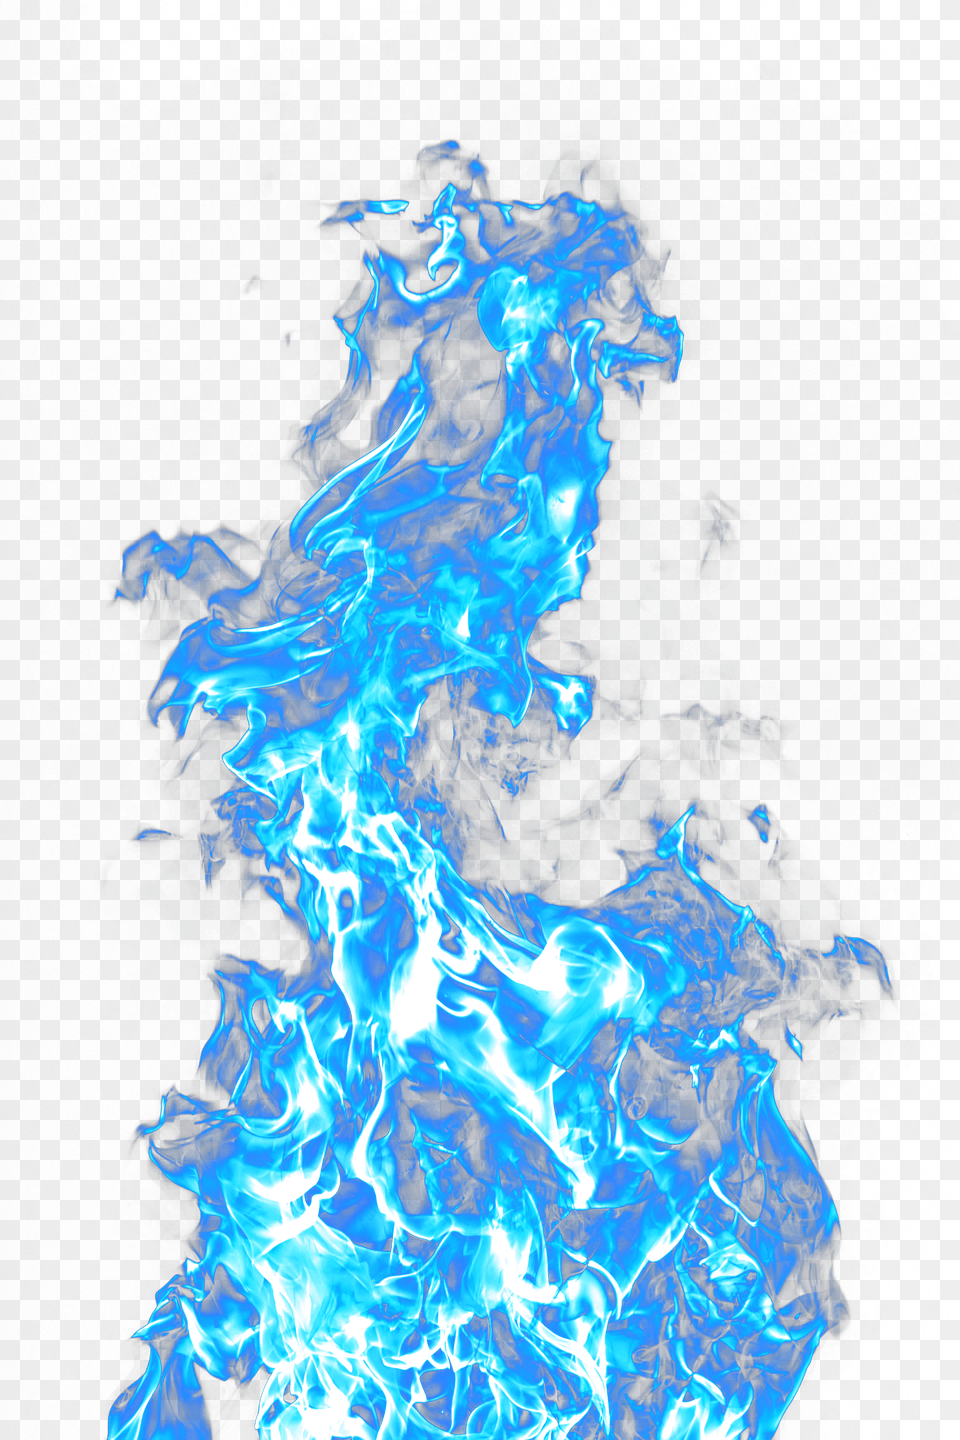 Beautiful Light Blue Flame File Hd Clipart Blue Flames Transparent Background Png